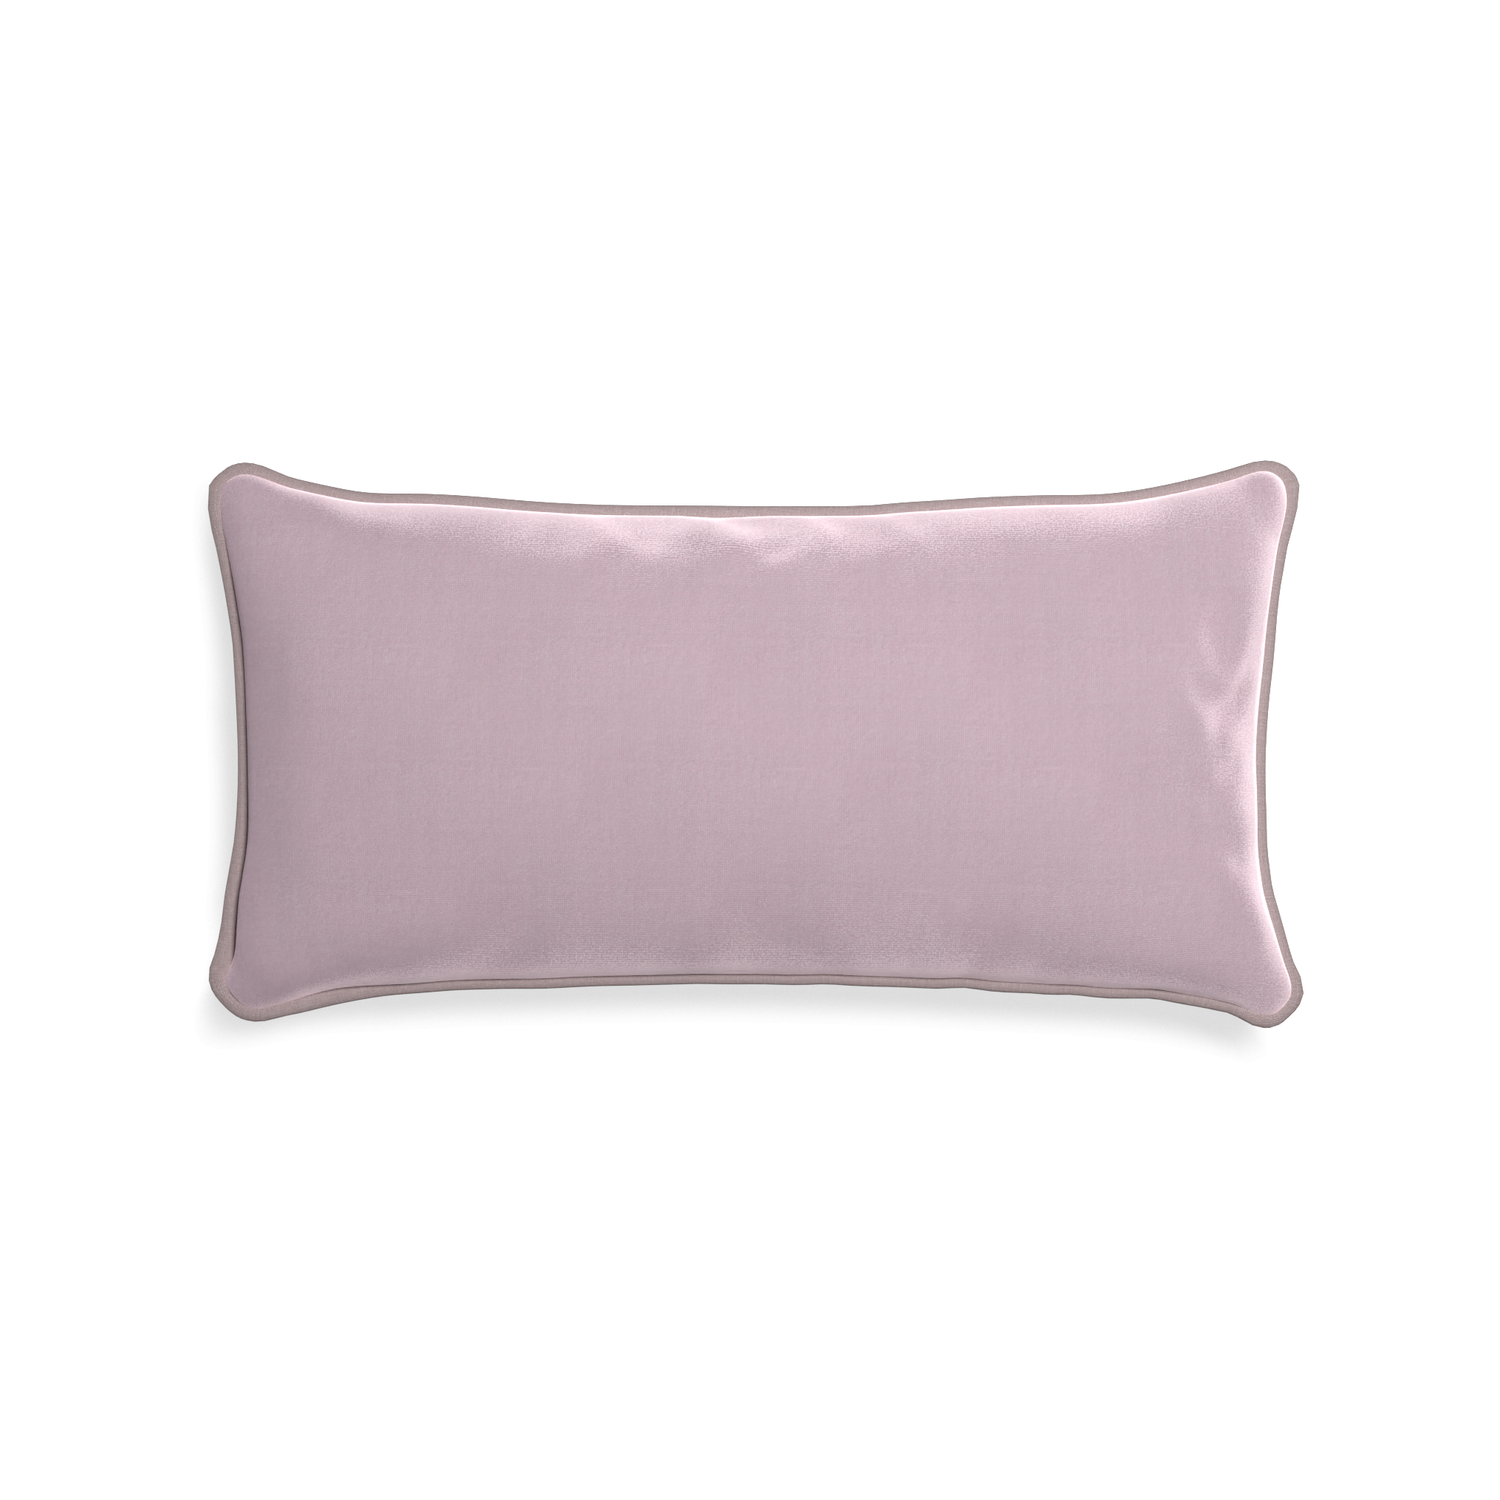 Midi-lumbar lilac velvet custom lilacpillow with orchid piping on white background